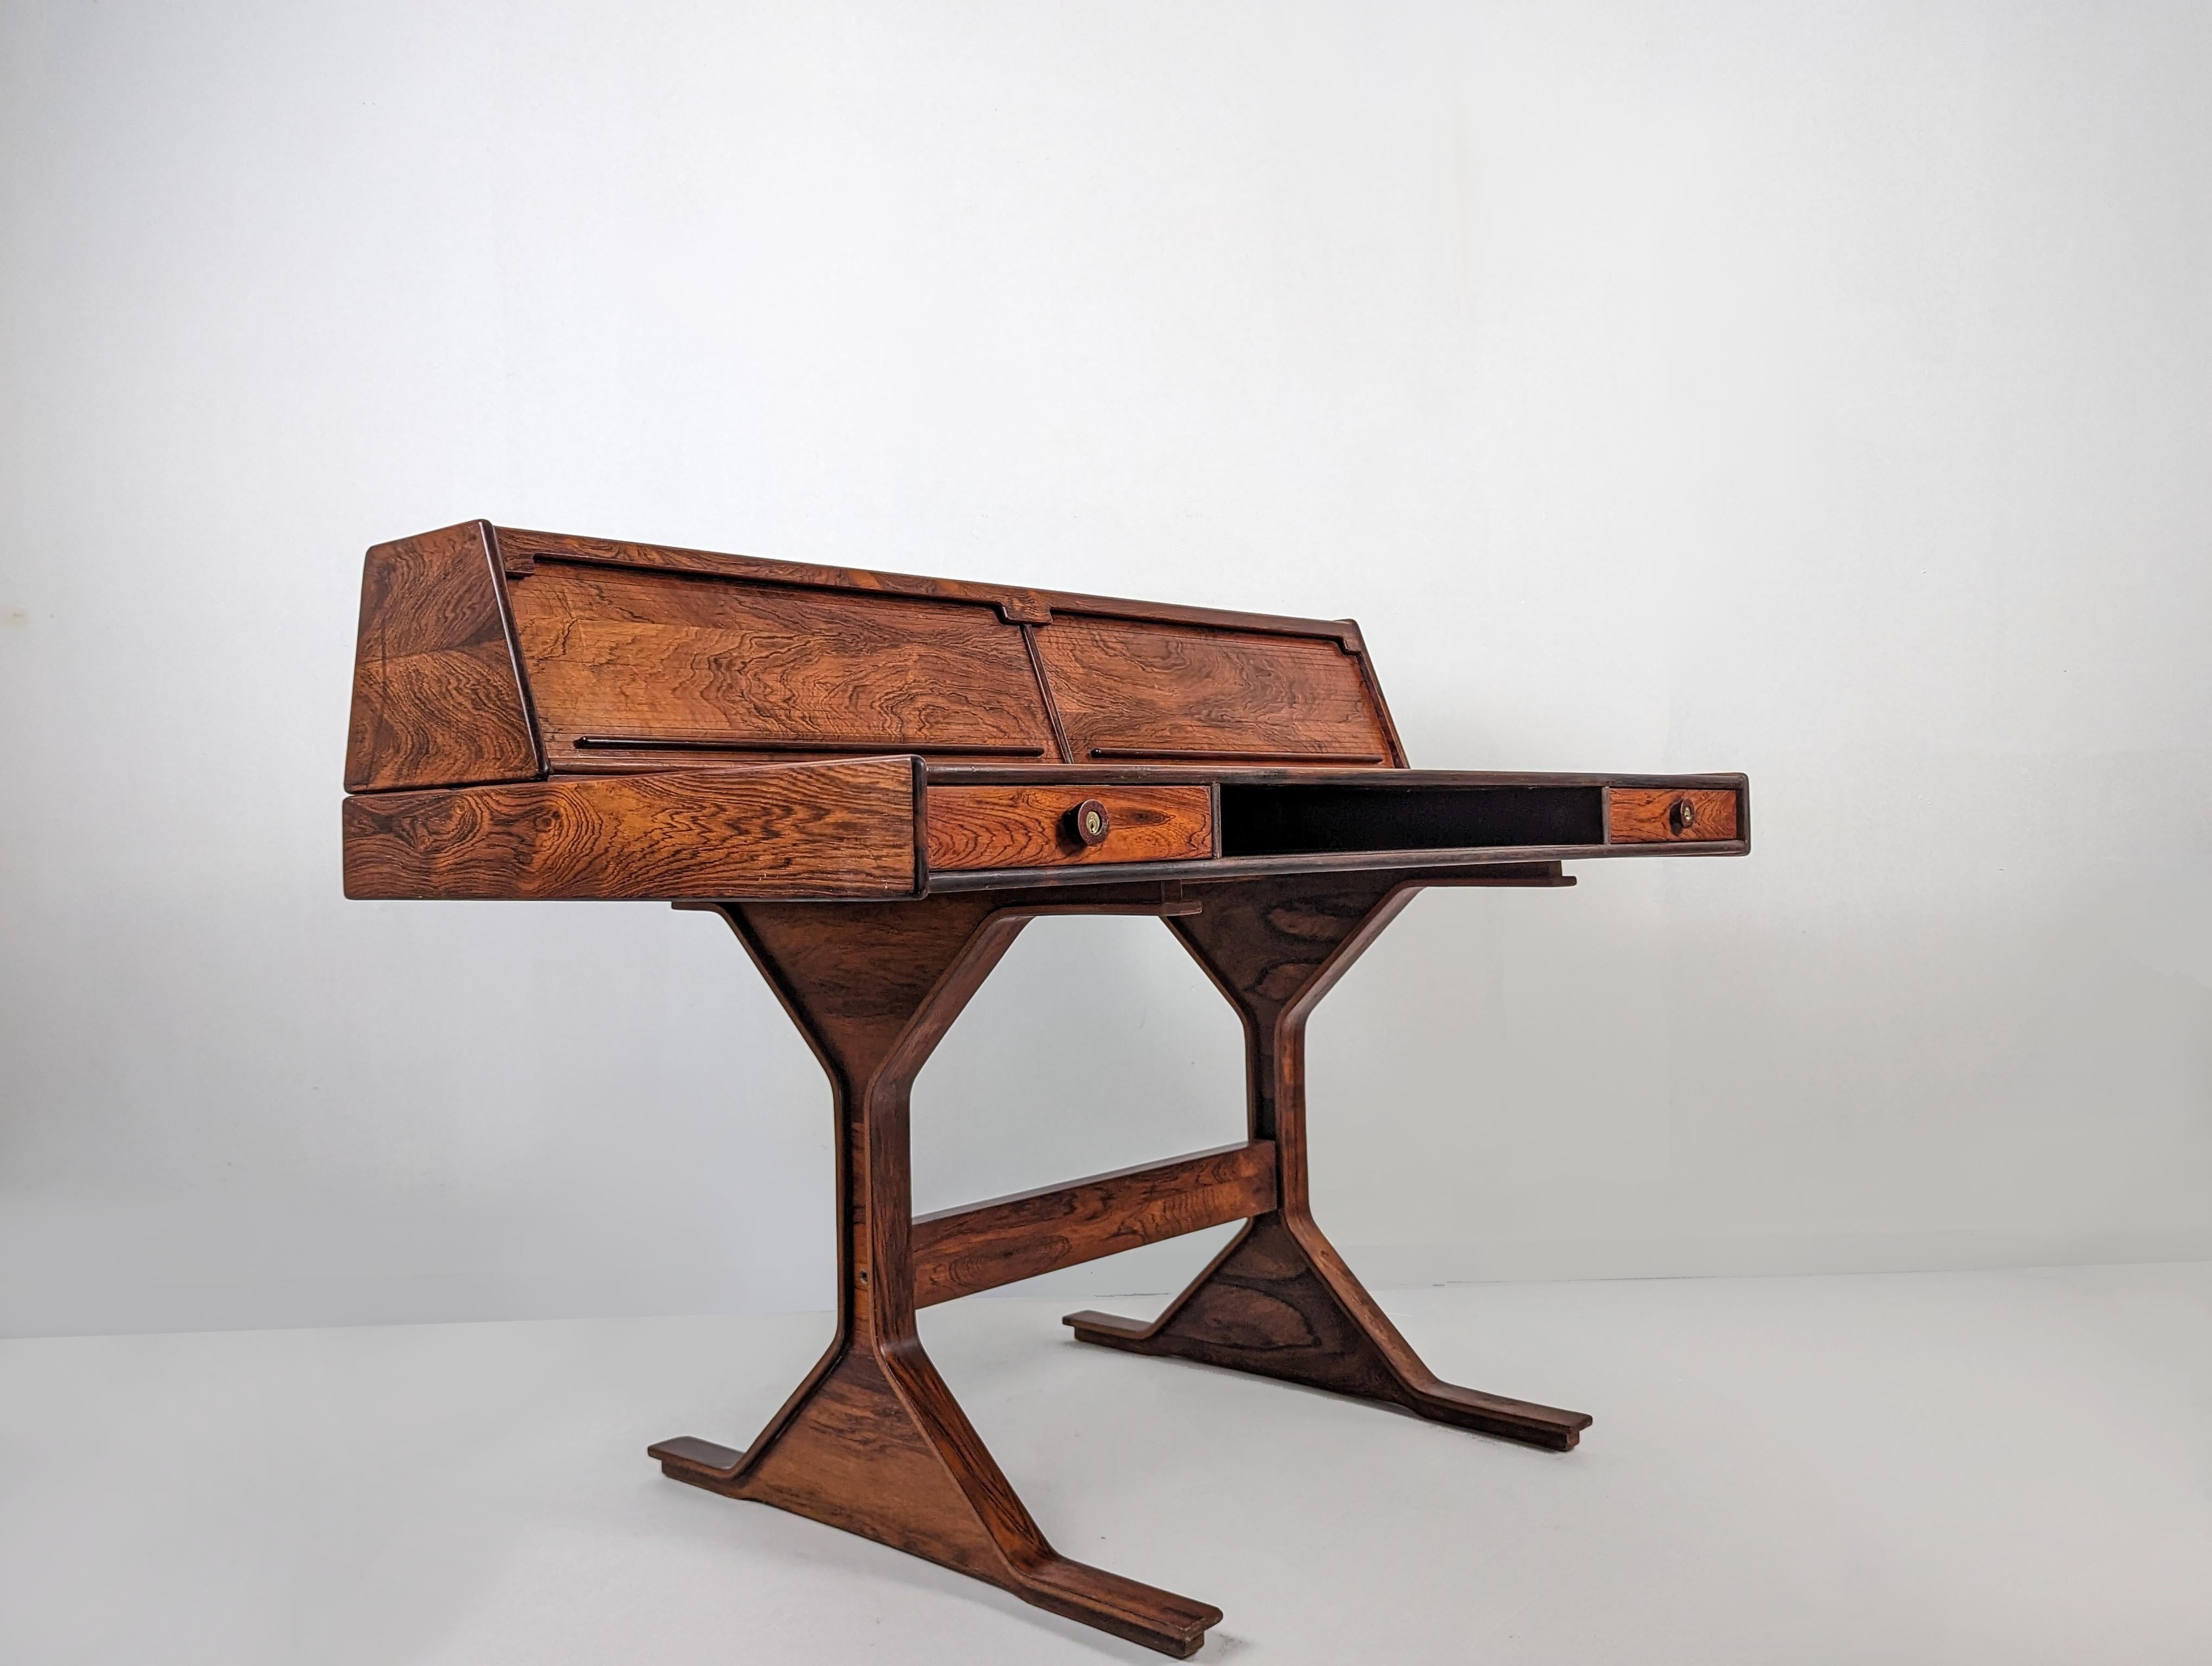 Exceptional rosewood desk designed by Gianfranco Frattini in the 1950s. Inextricably linked to the history of prestigious Italian companies, such as Artemide, Bernini and Cassina. Gianfranco Frattini after working in the atelier of his teacher and